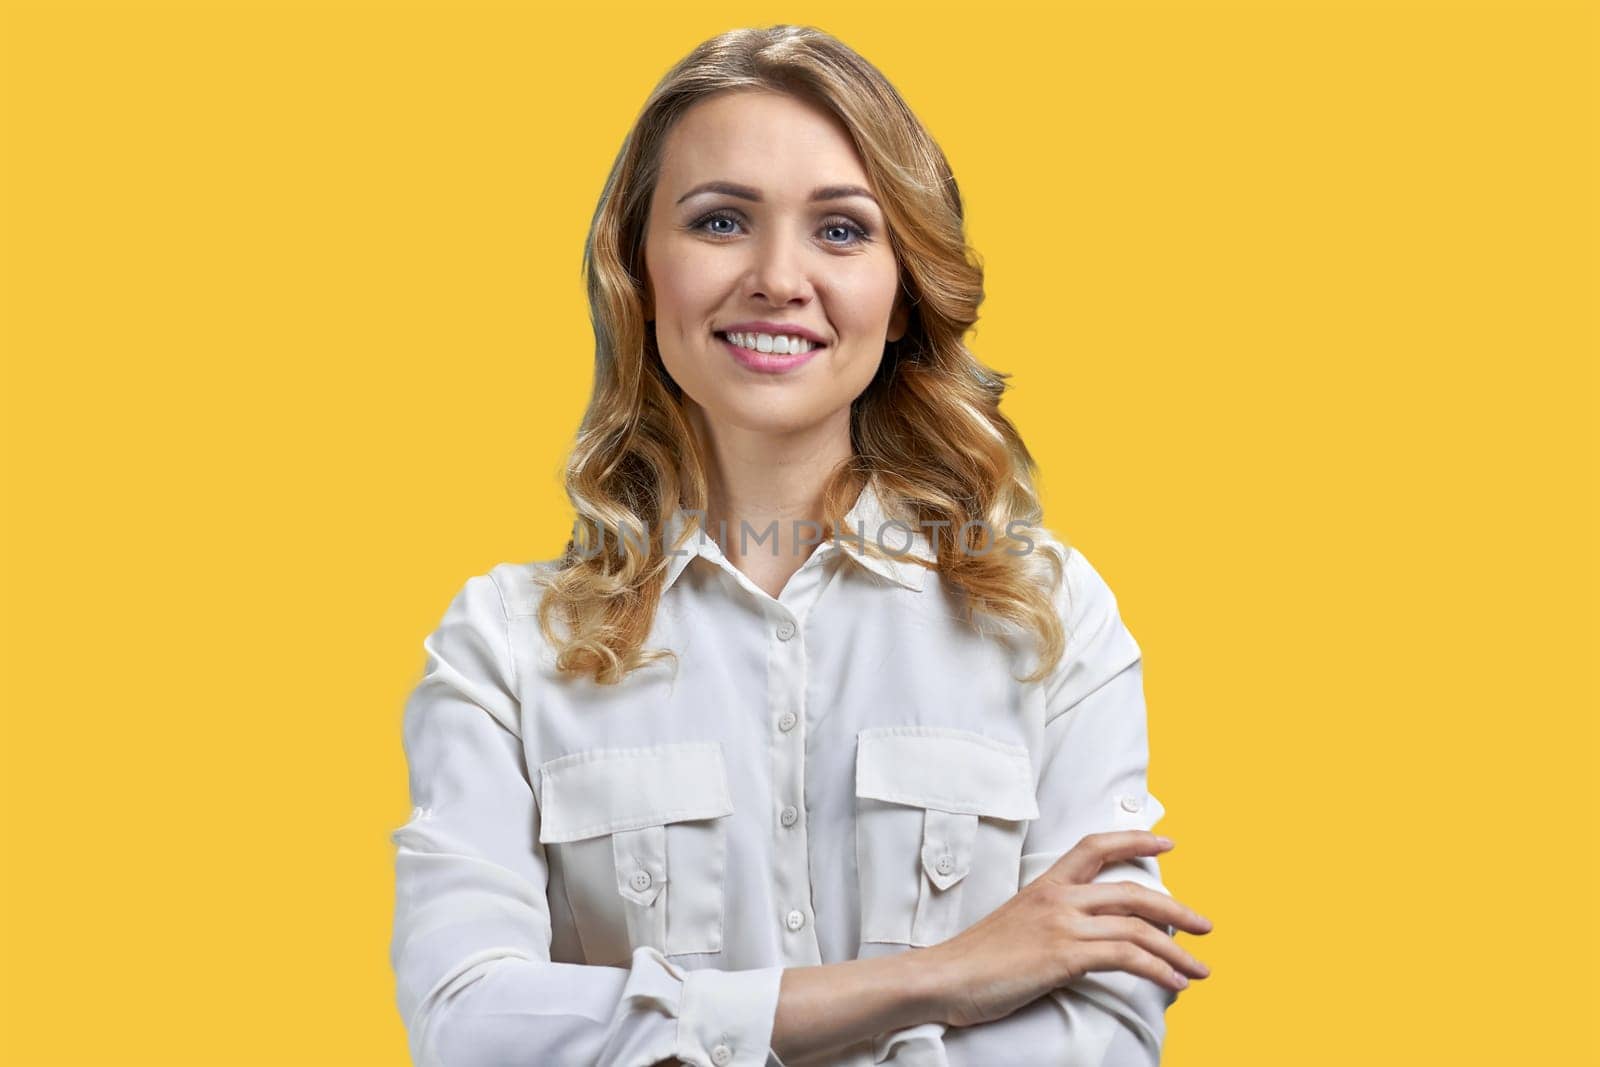 Protrait of a young blonde smiling woman with folded arms. Vivid yellow background.